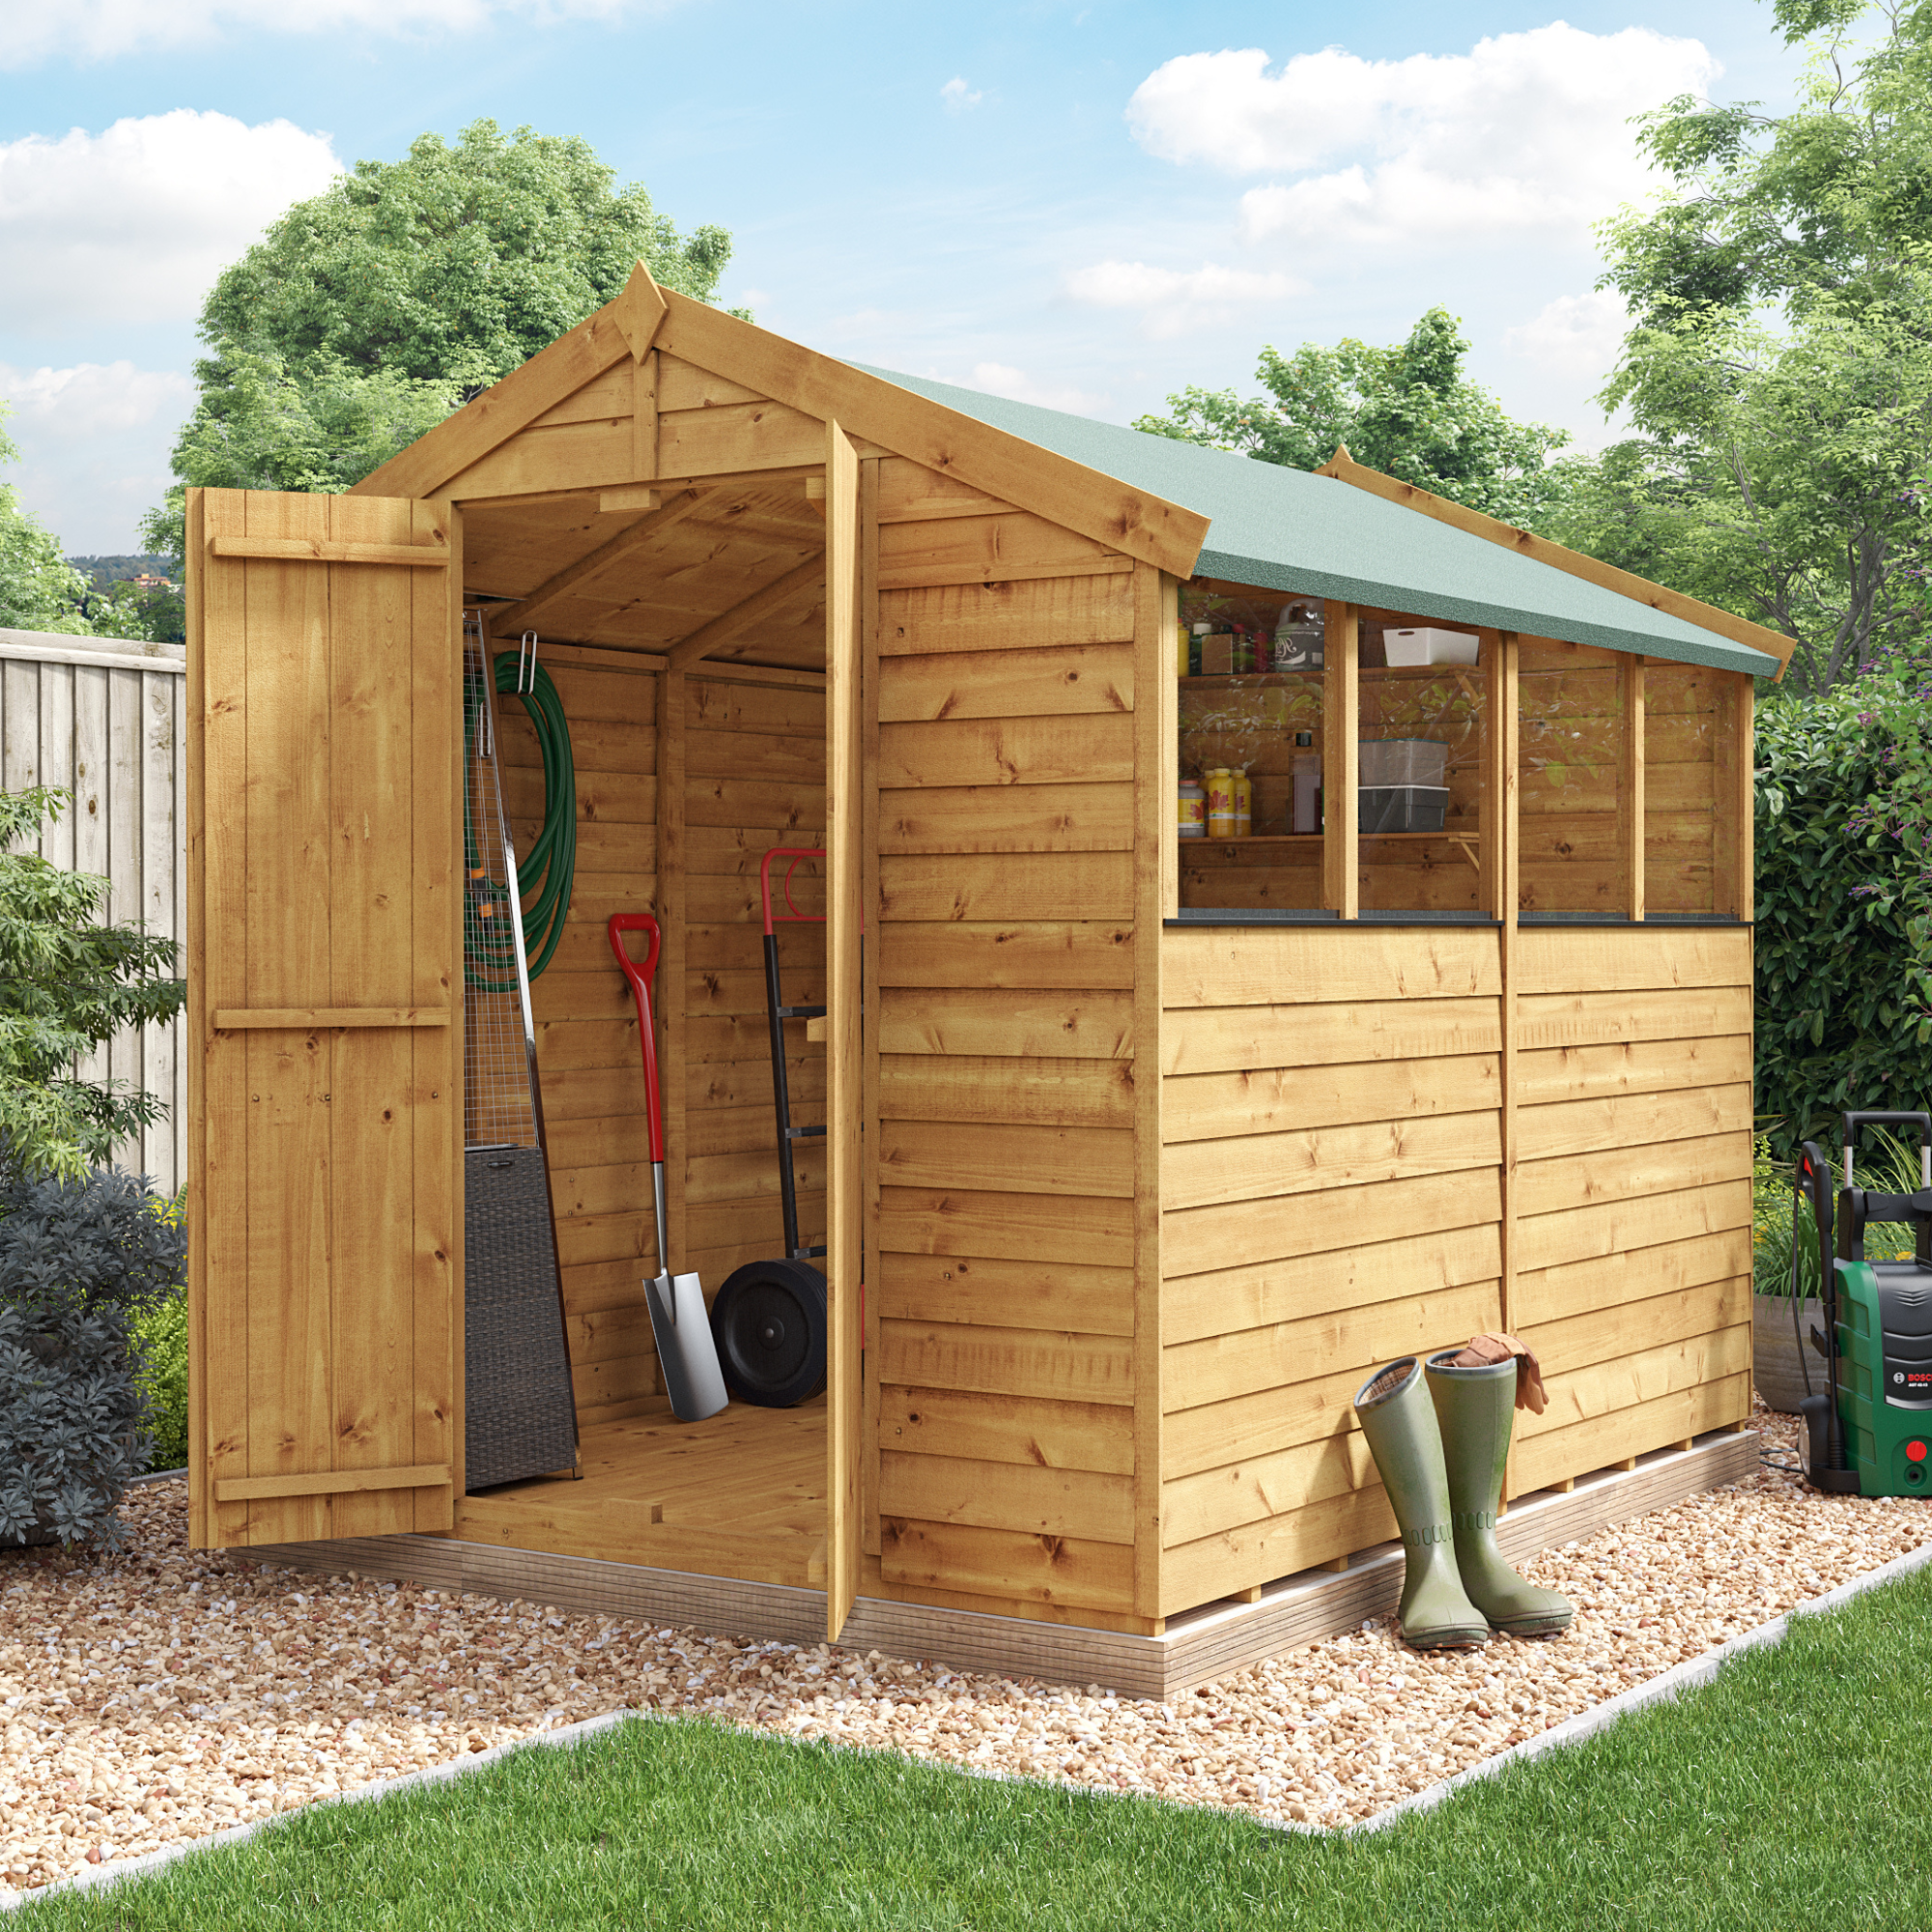 8 x 6 Shed - BillyOh Keeper Overlap Apex Wooden Shed - Windowed 8x6 Garden Shed